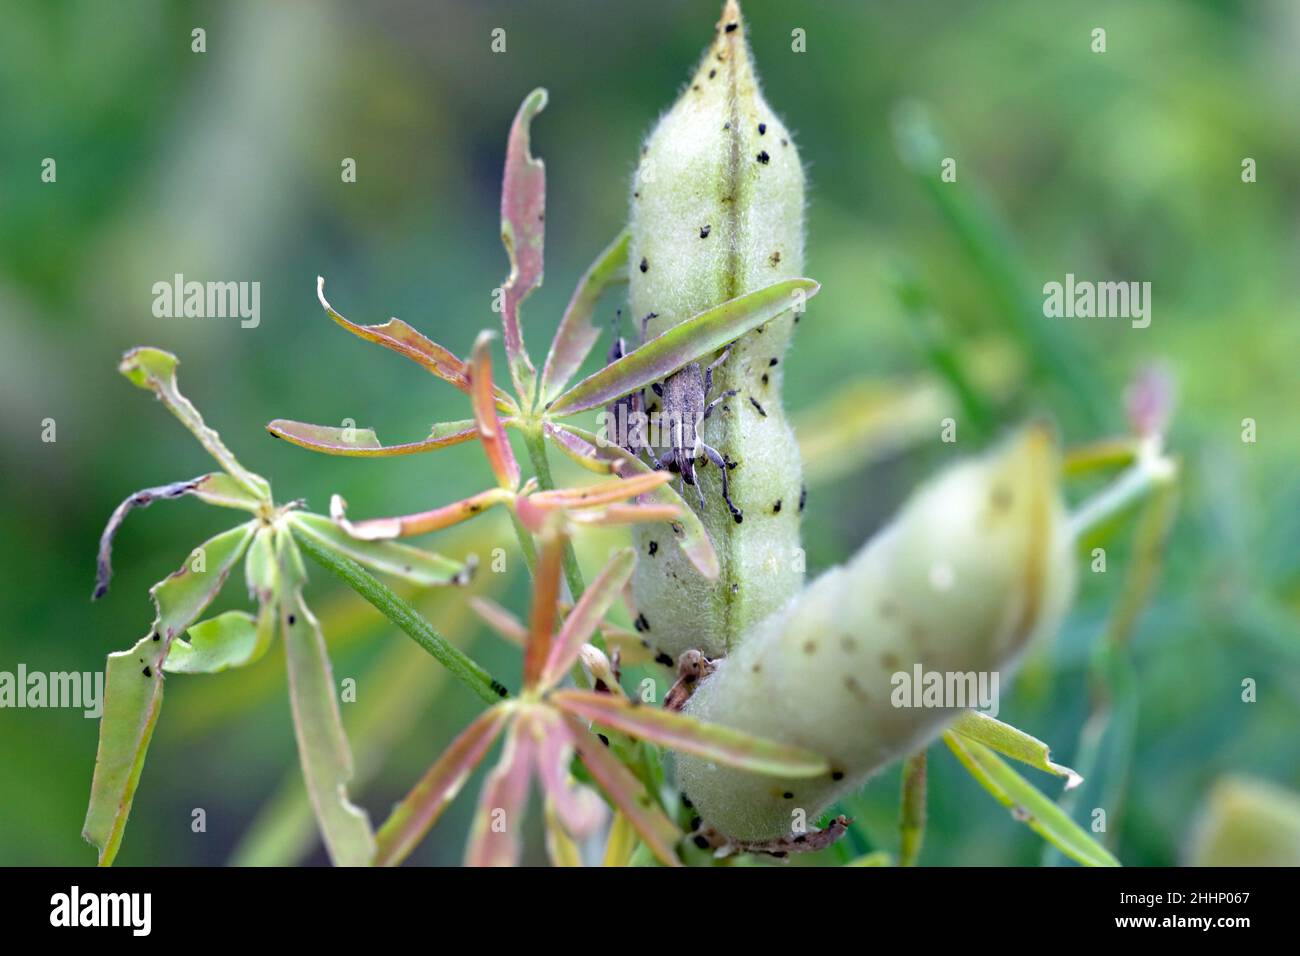 Legume lupine sprouts damaged by the insect pests - Sitona griseus. Stock Photo